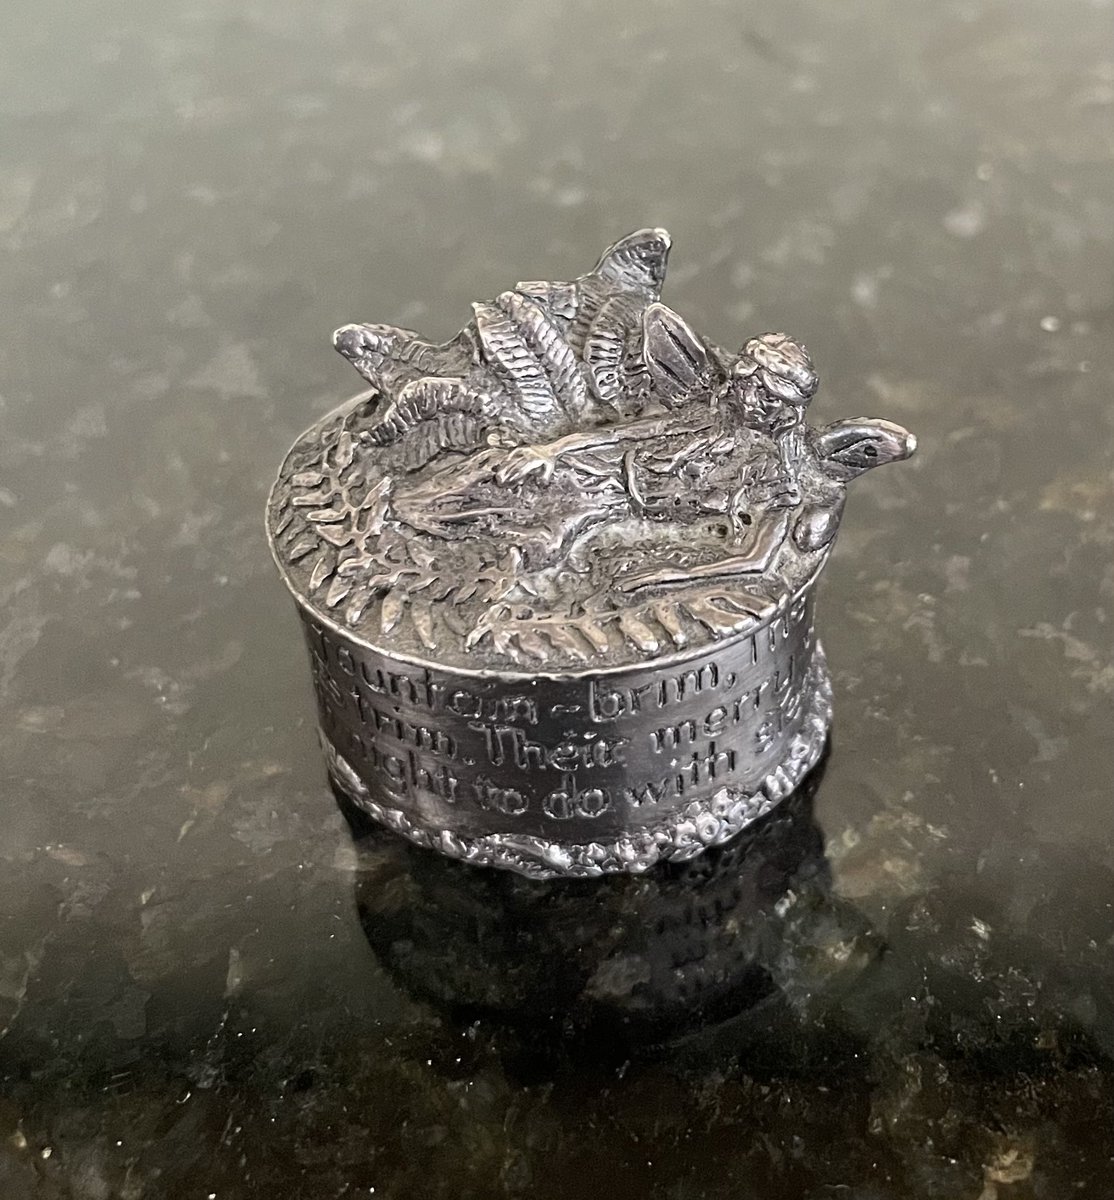 I’ve had a little job lot of these delightful pewter trinket and thimble boxes come in, but if you want one, act fast, I’ve already sold a few!  #VintageShowAndSell etsy.com/uk/shop/SarahH… #Vintage4Sale #vintageinspired #etsygifts #etsyshop